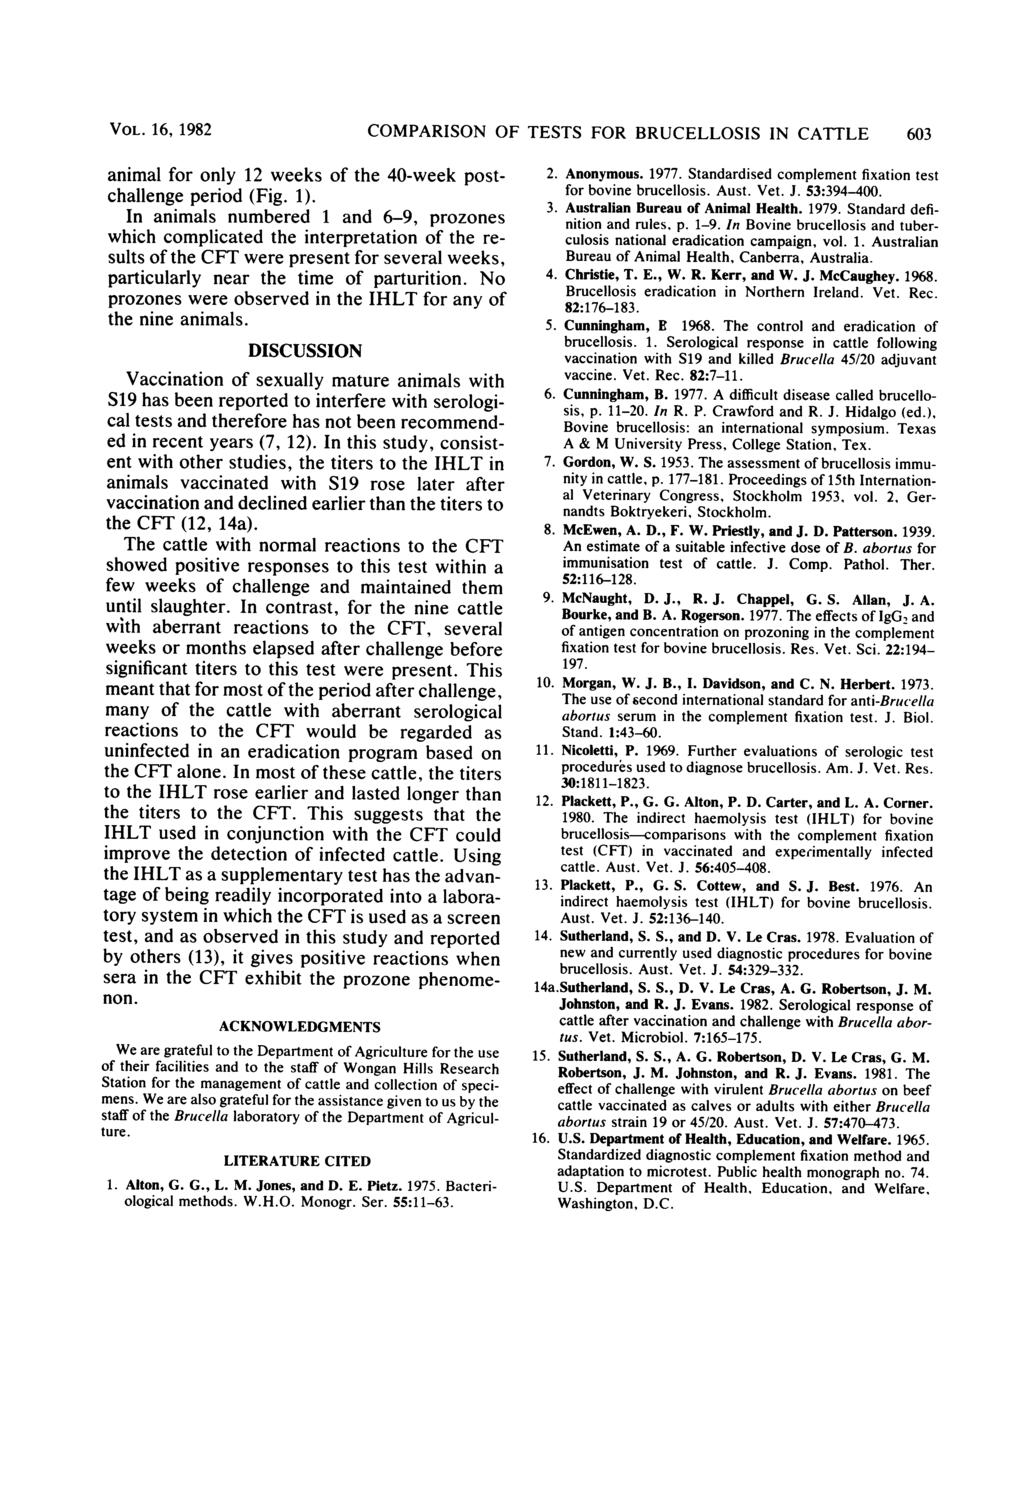 VOL. 1, 1982 COMPARISON OF TESTS FOR BRUCELLOSIS IN CATTLE 3 animal for only 12 eeks of the 4-eek postchallenge period (Fig. 1).